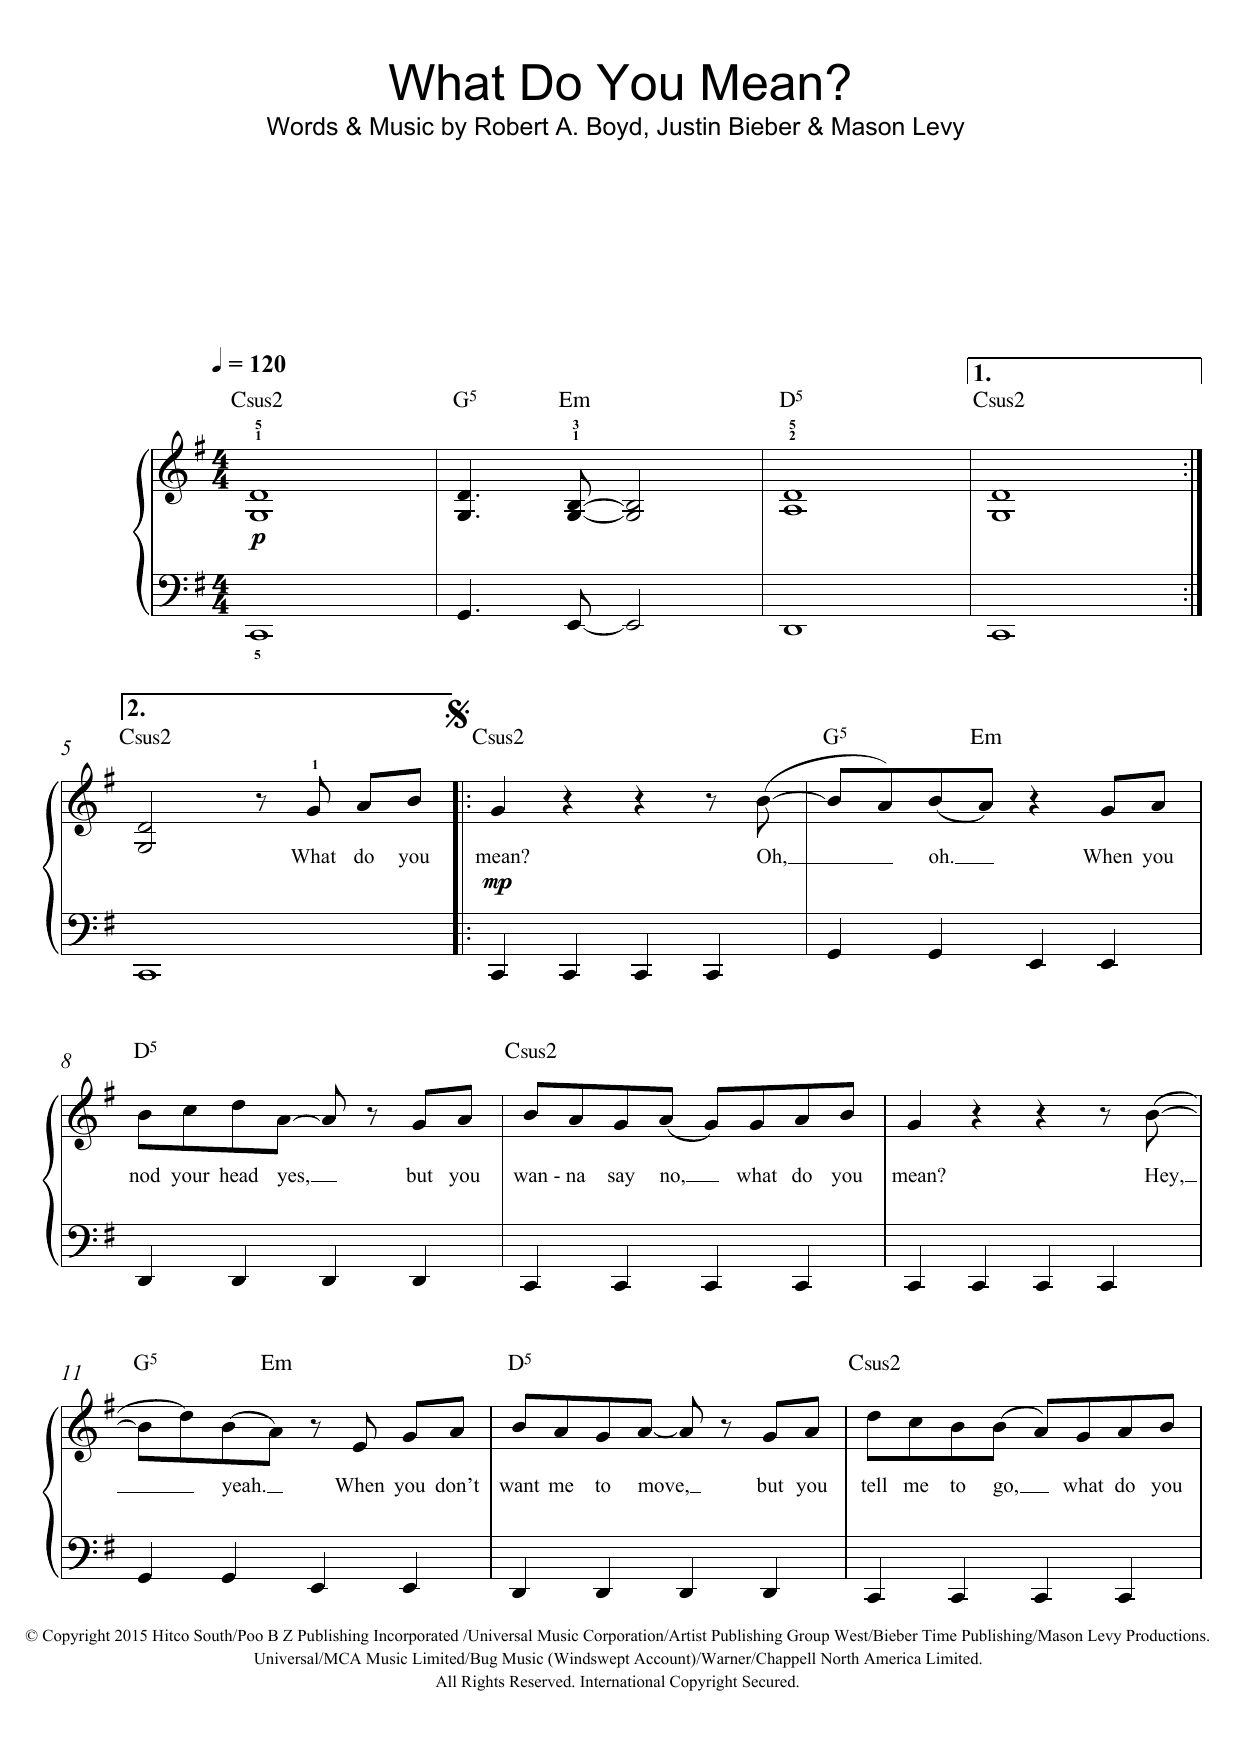 Download Justin Bieber What Do You Mean? Sheet Music